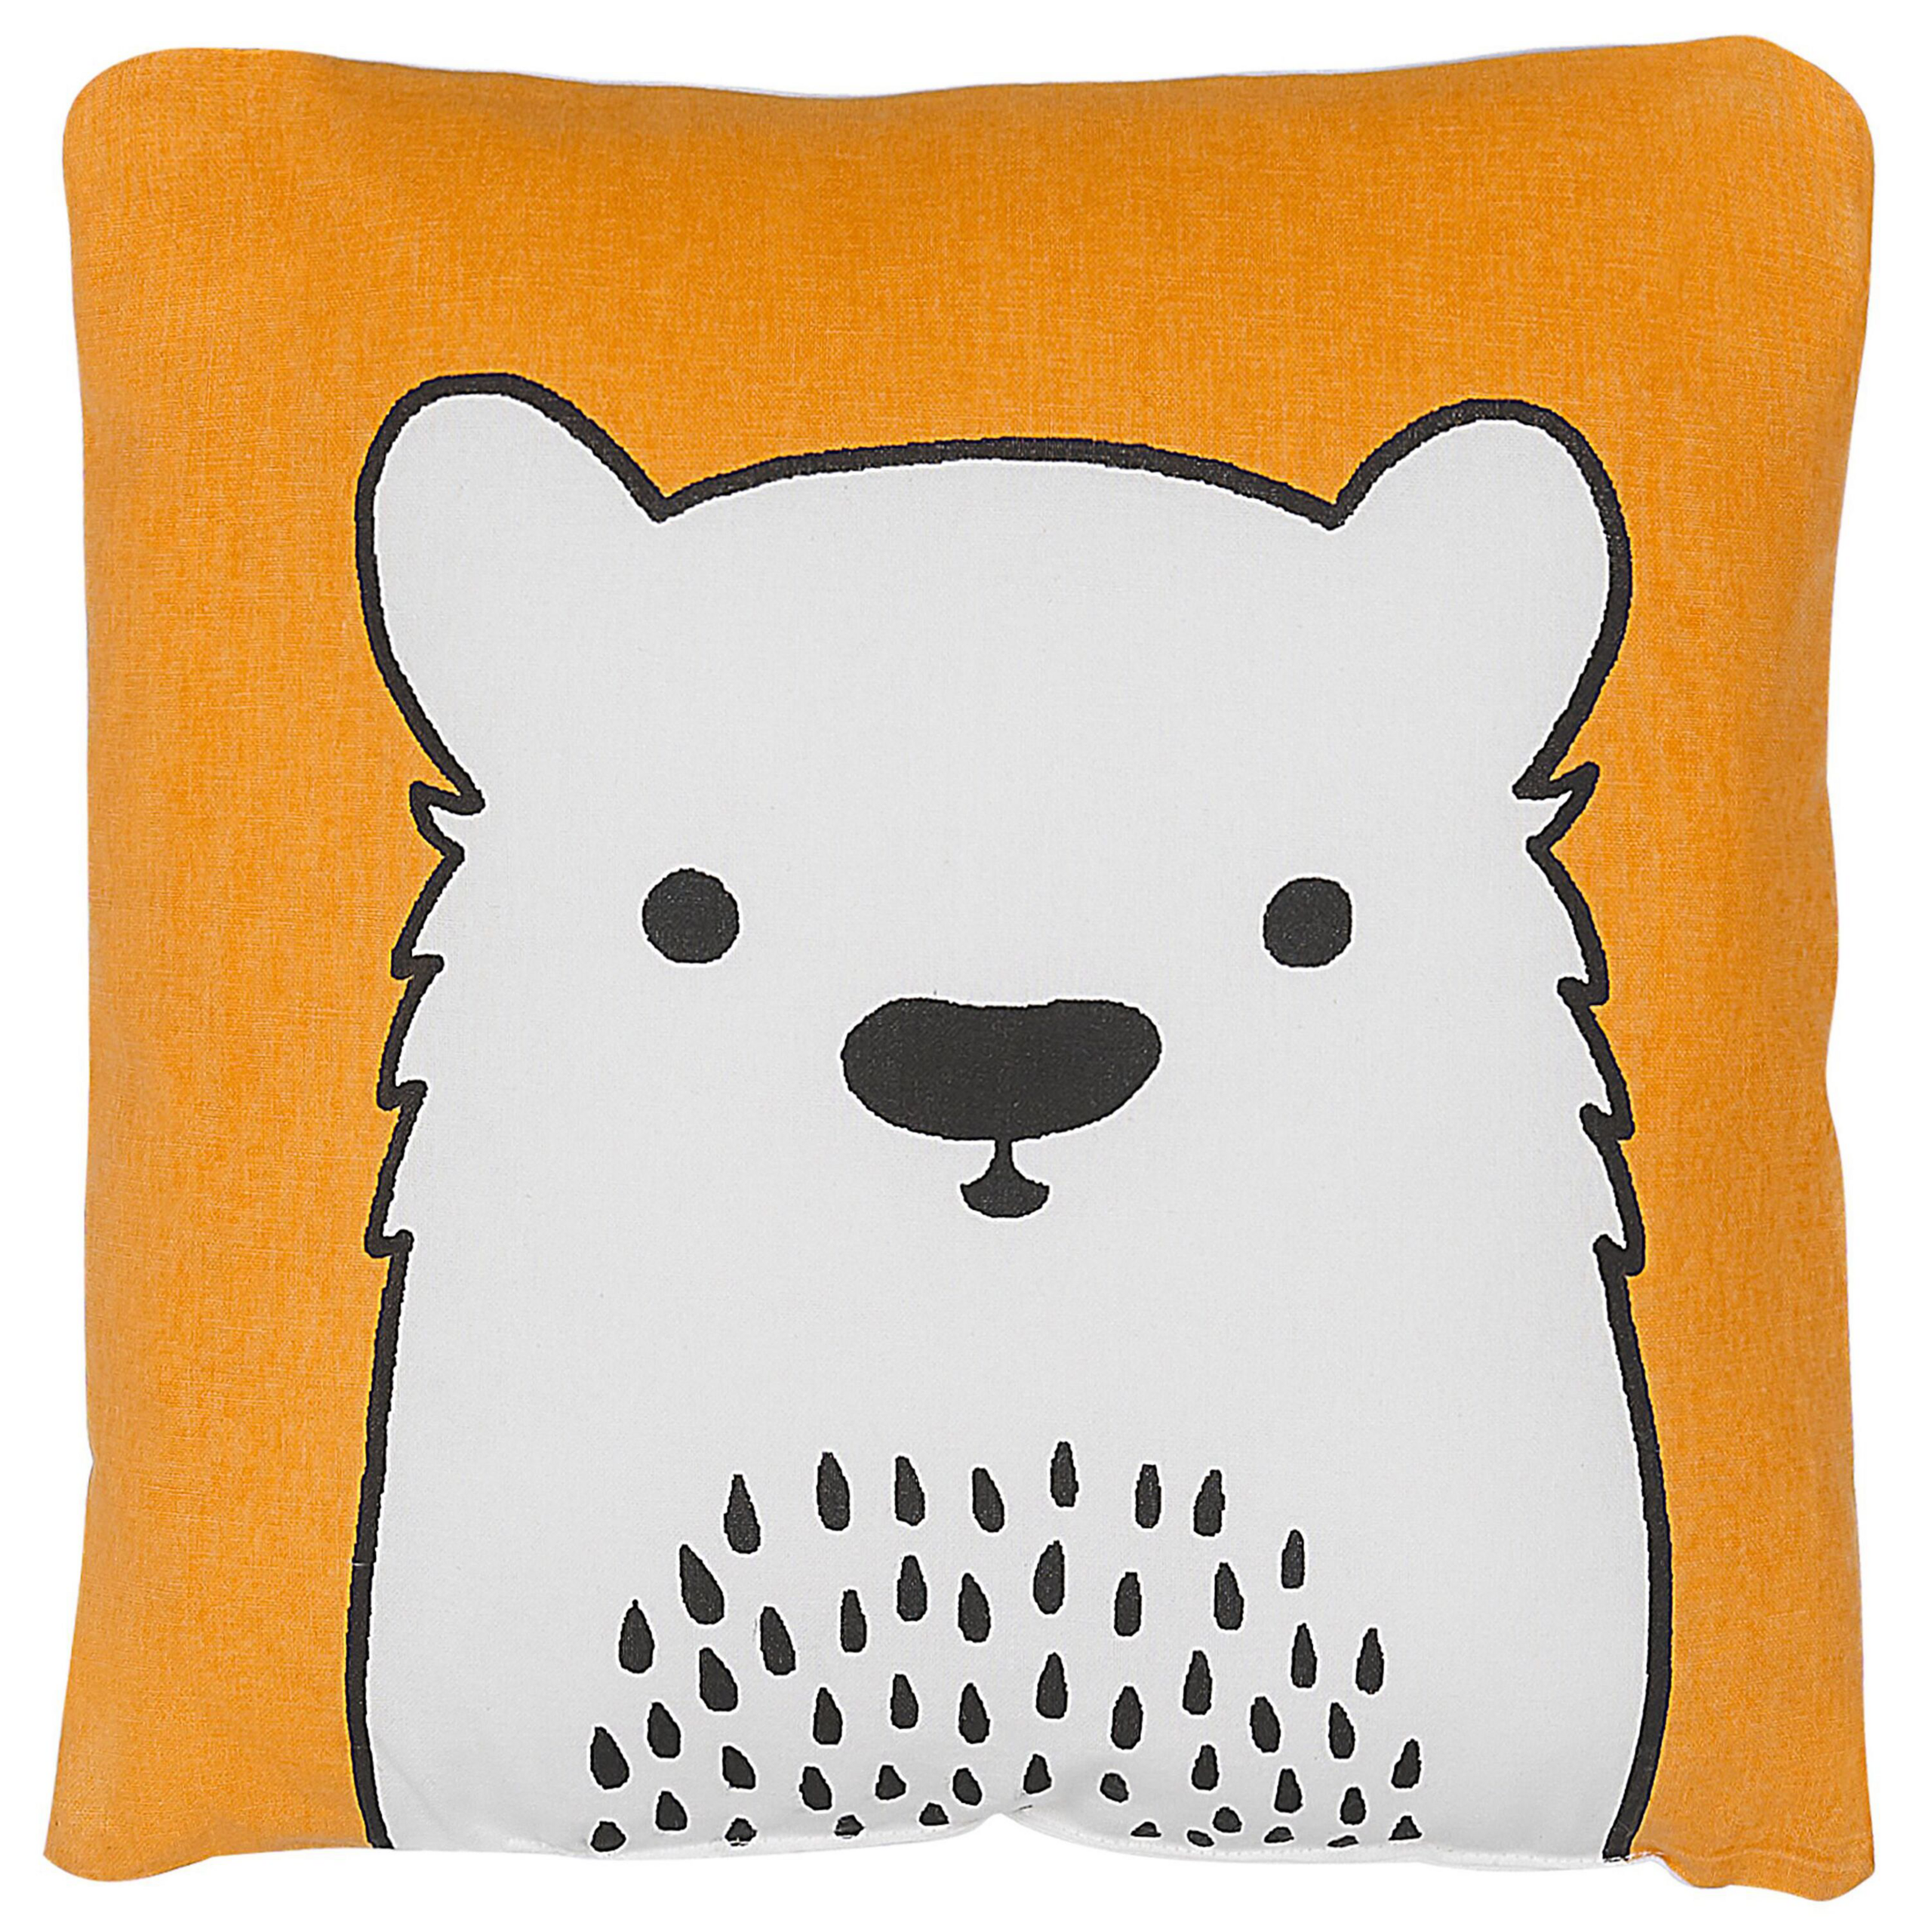 Beliani Kids Cushion Orange Fabric Bear Image Pillow with Filling Soft Children's Toy Material:Cotton Size:45x12x45